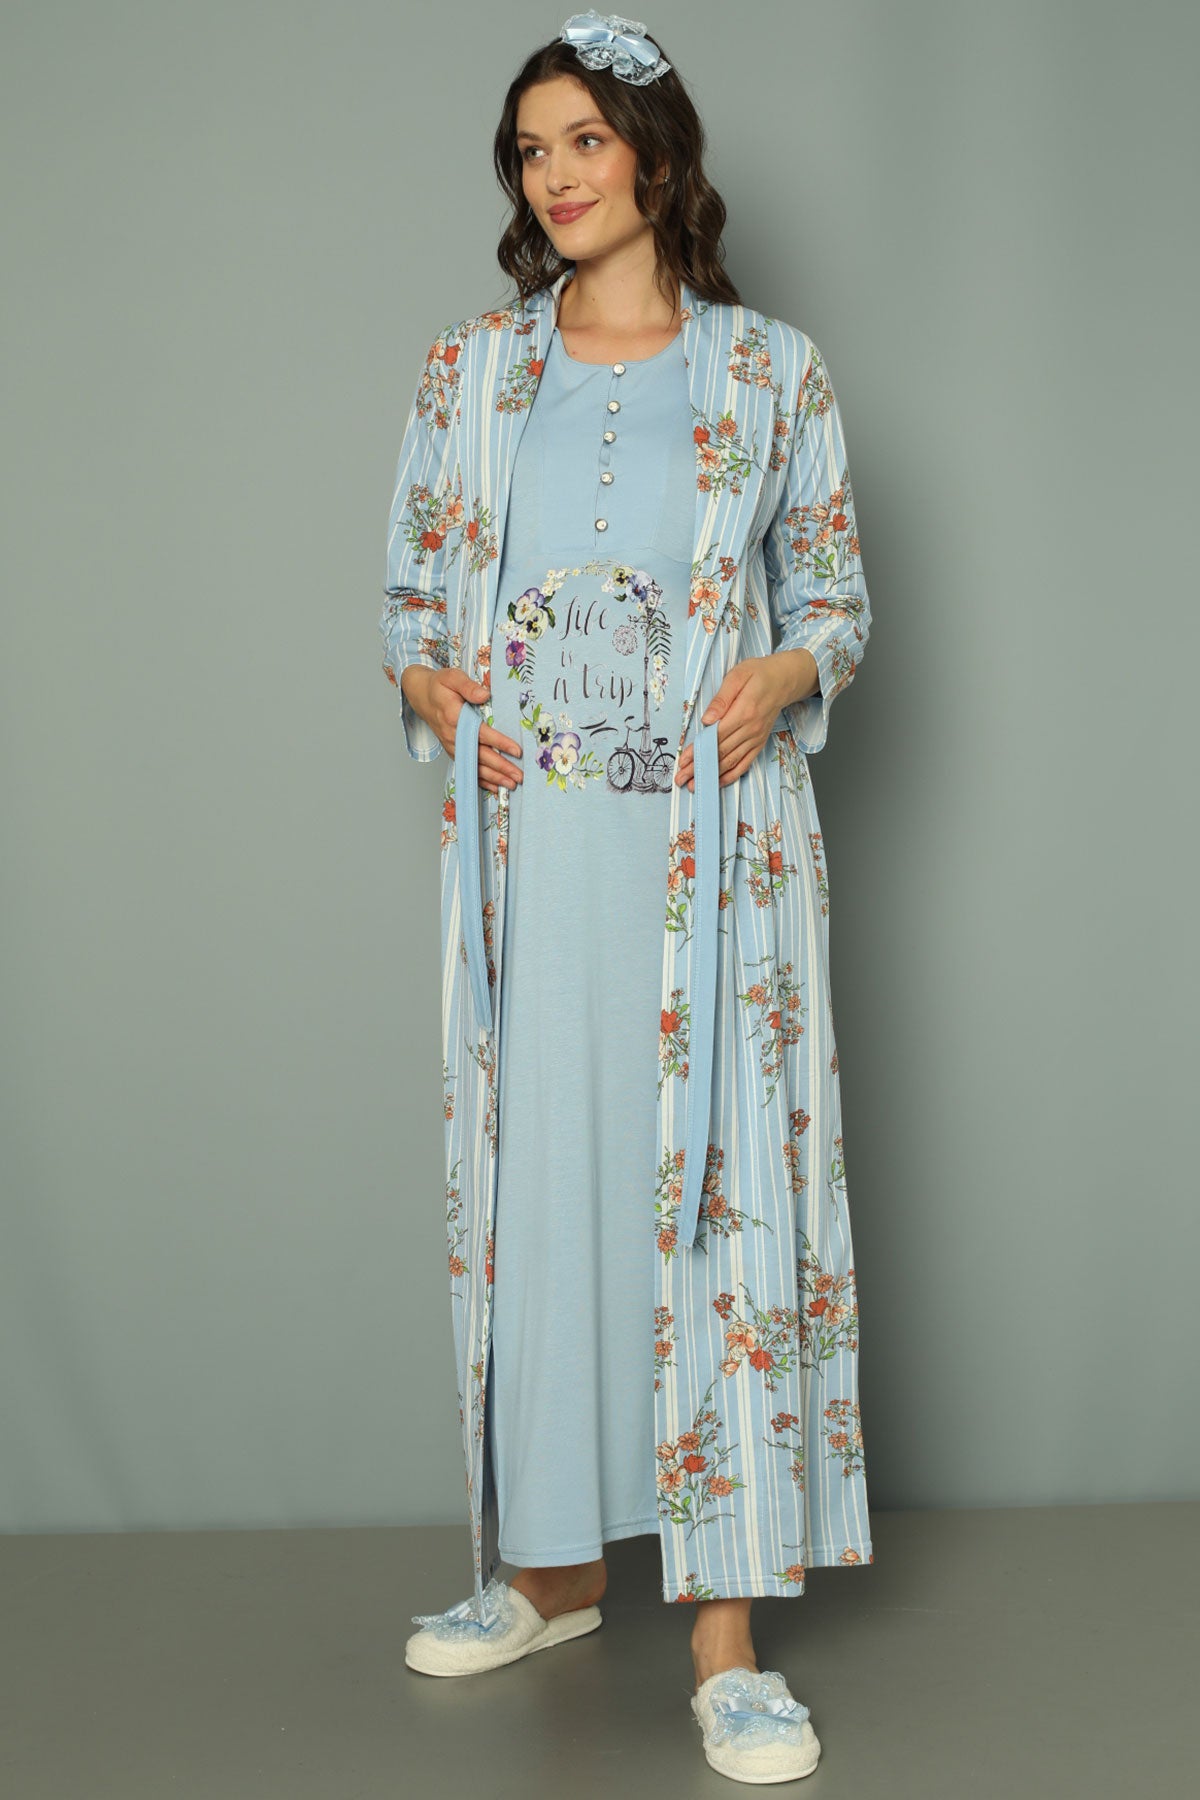 Shopymommy 2257 Maternity & Nursing Nightgown With Patterned Robe Blue